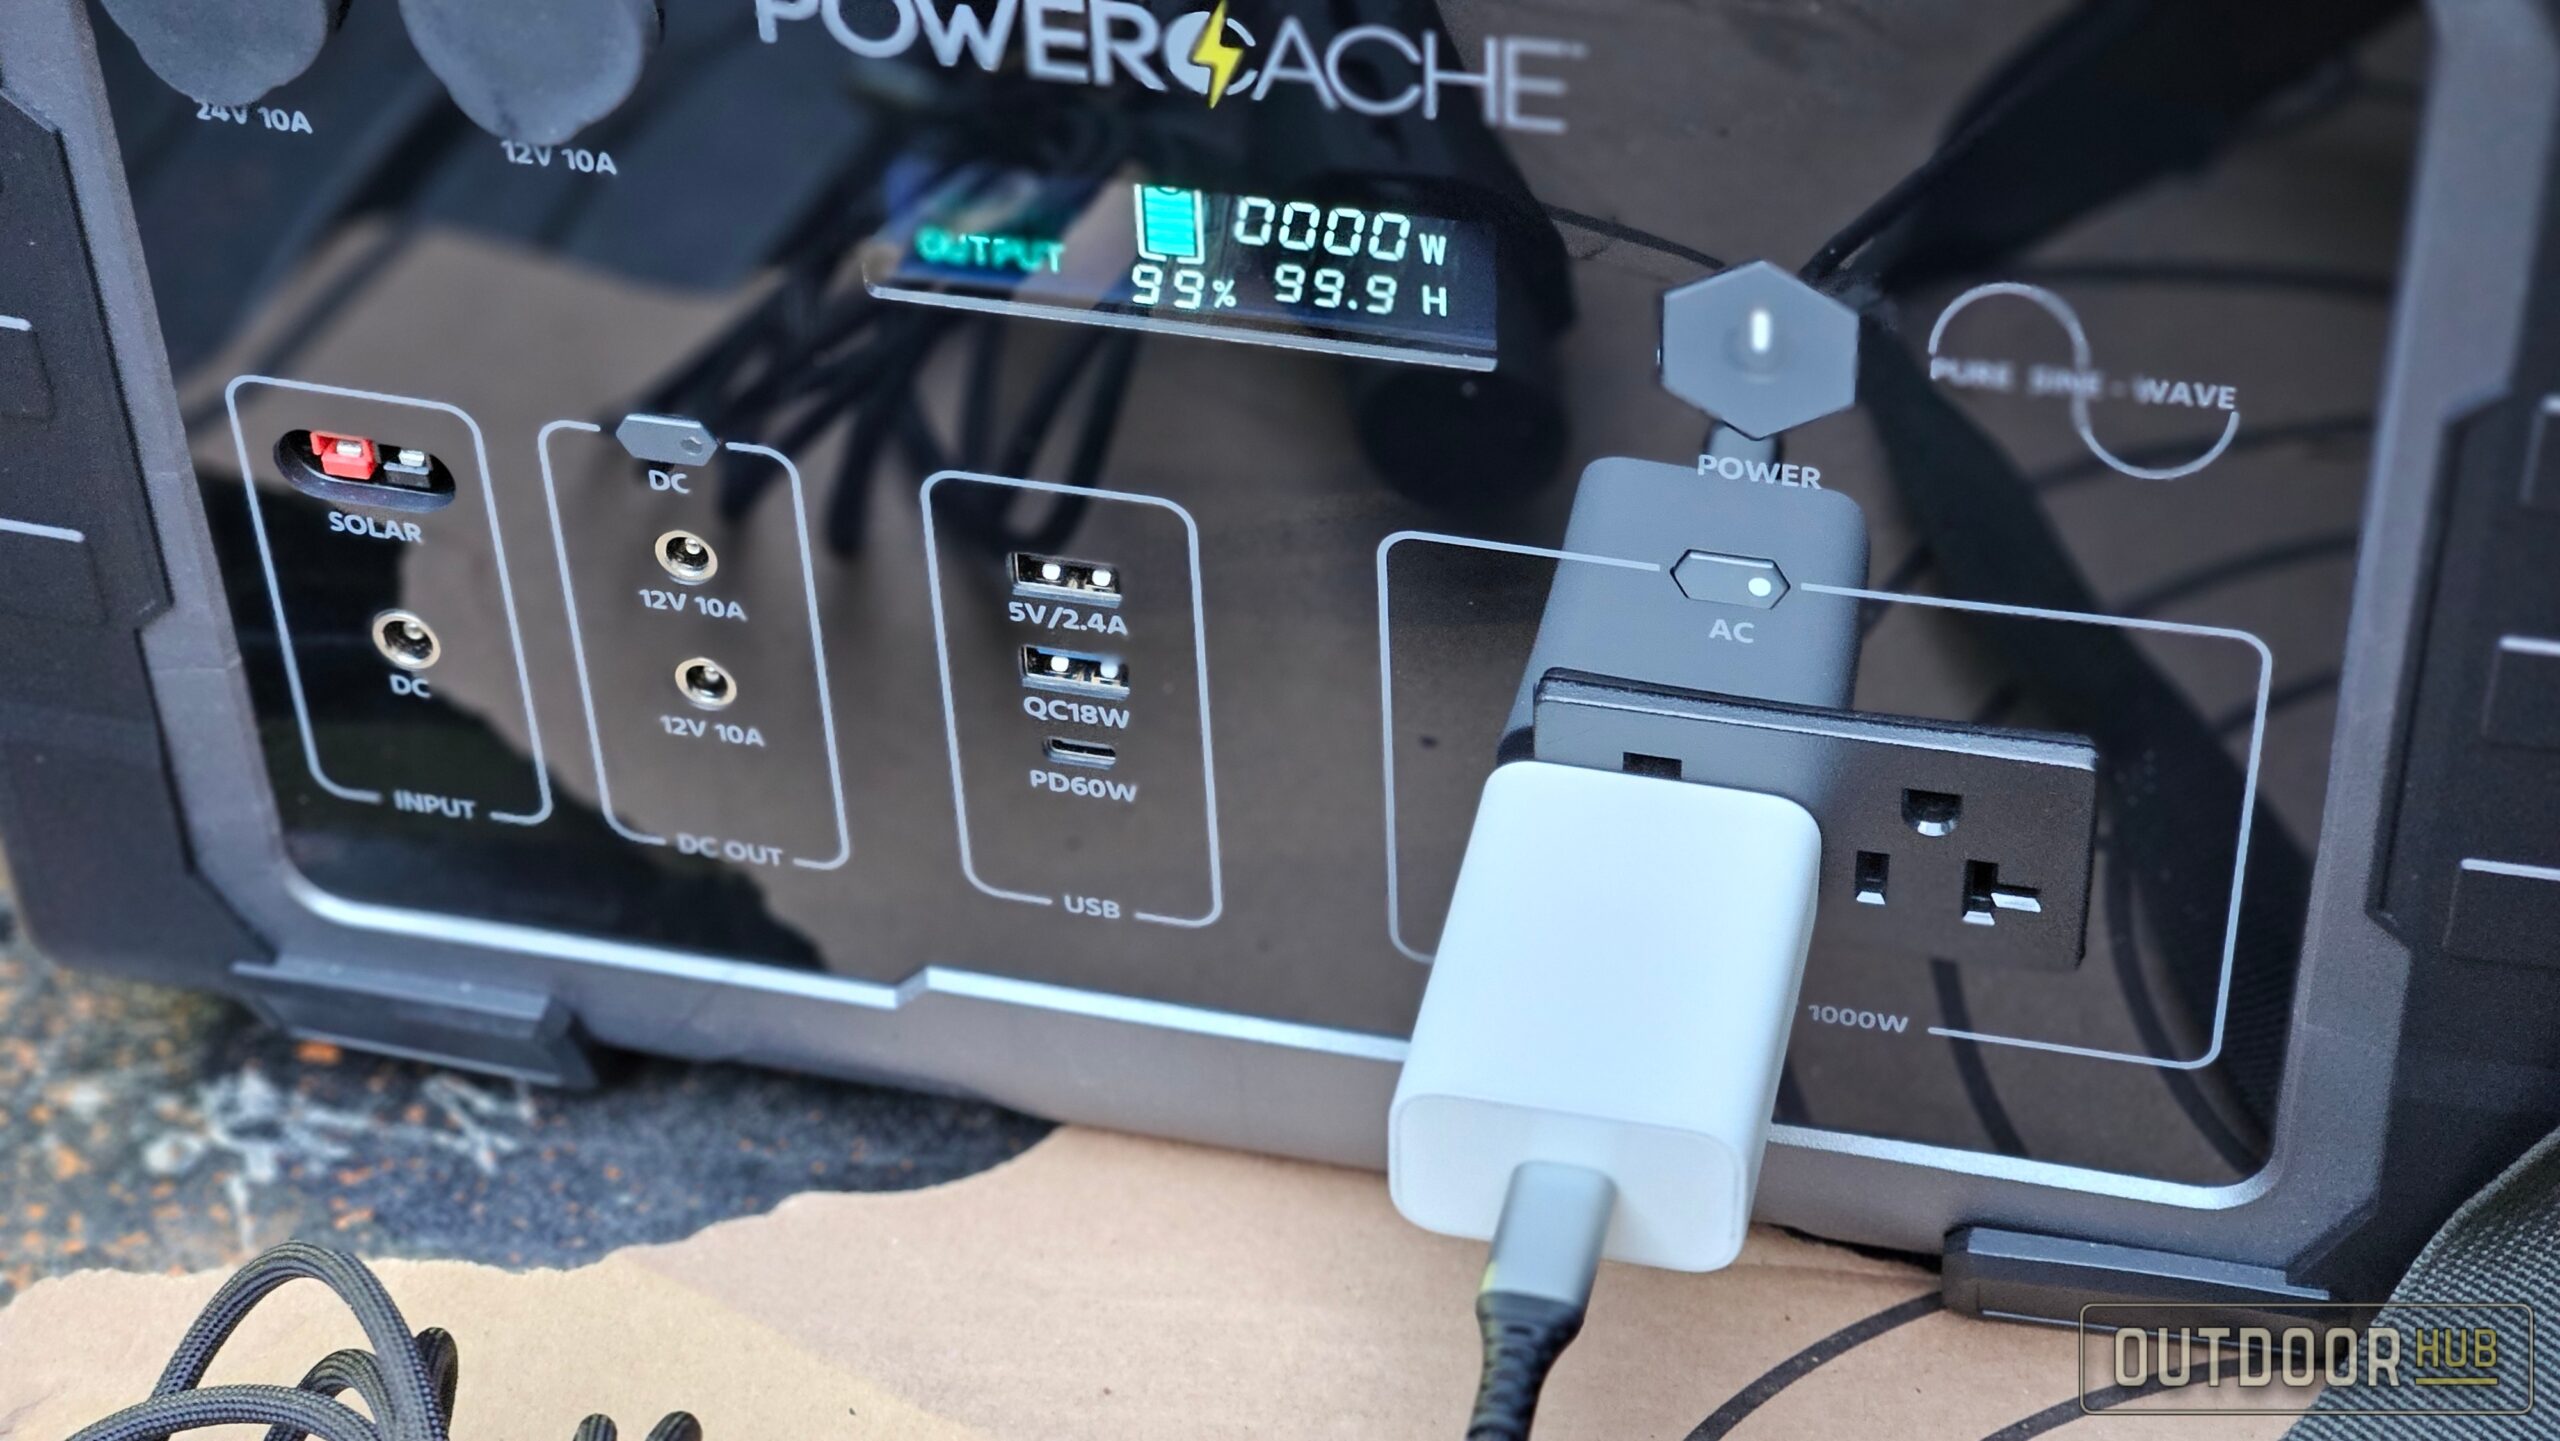 OHUB Review: The Monoprice PowerCache 1000 Portable Power Station